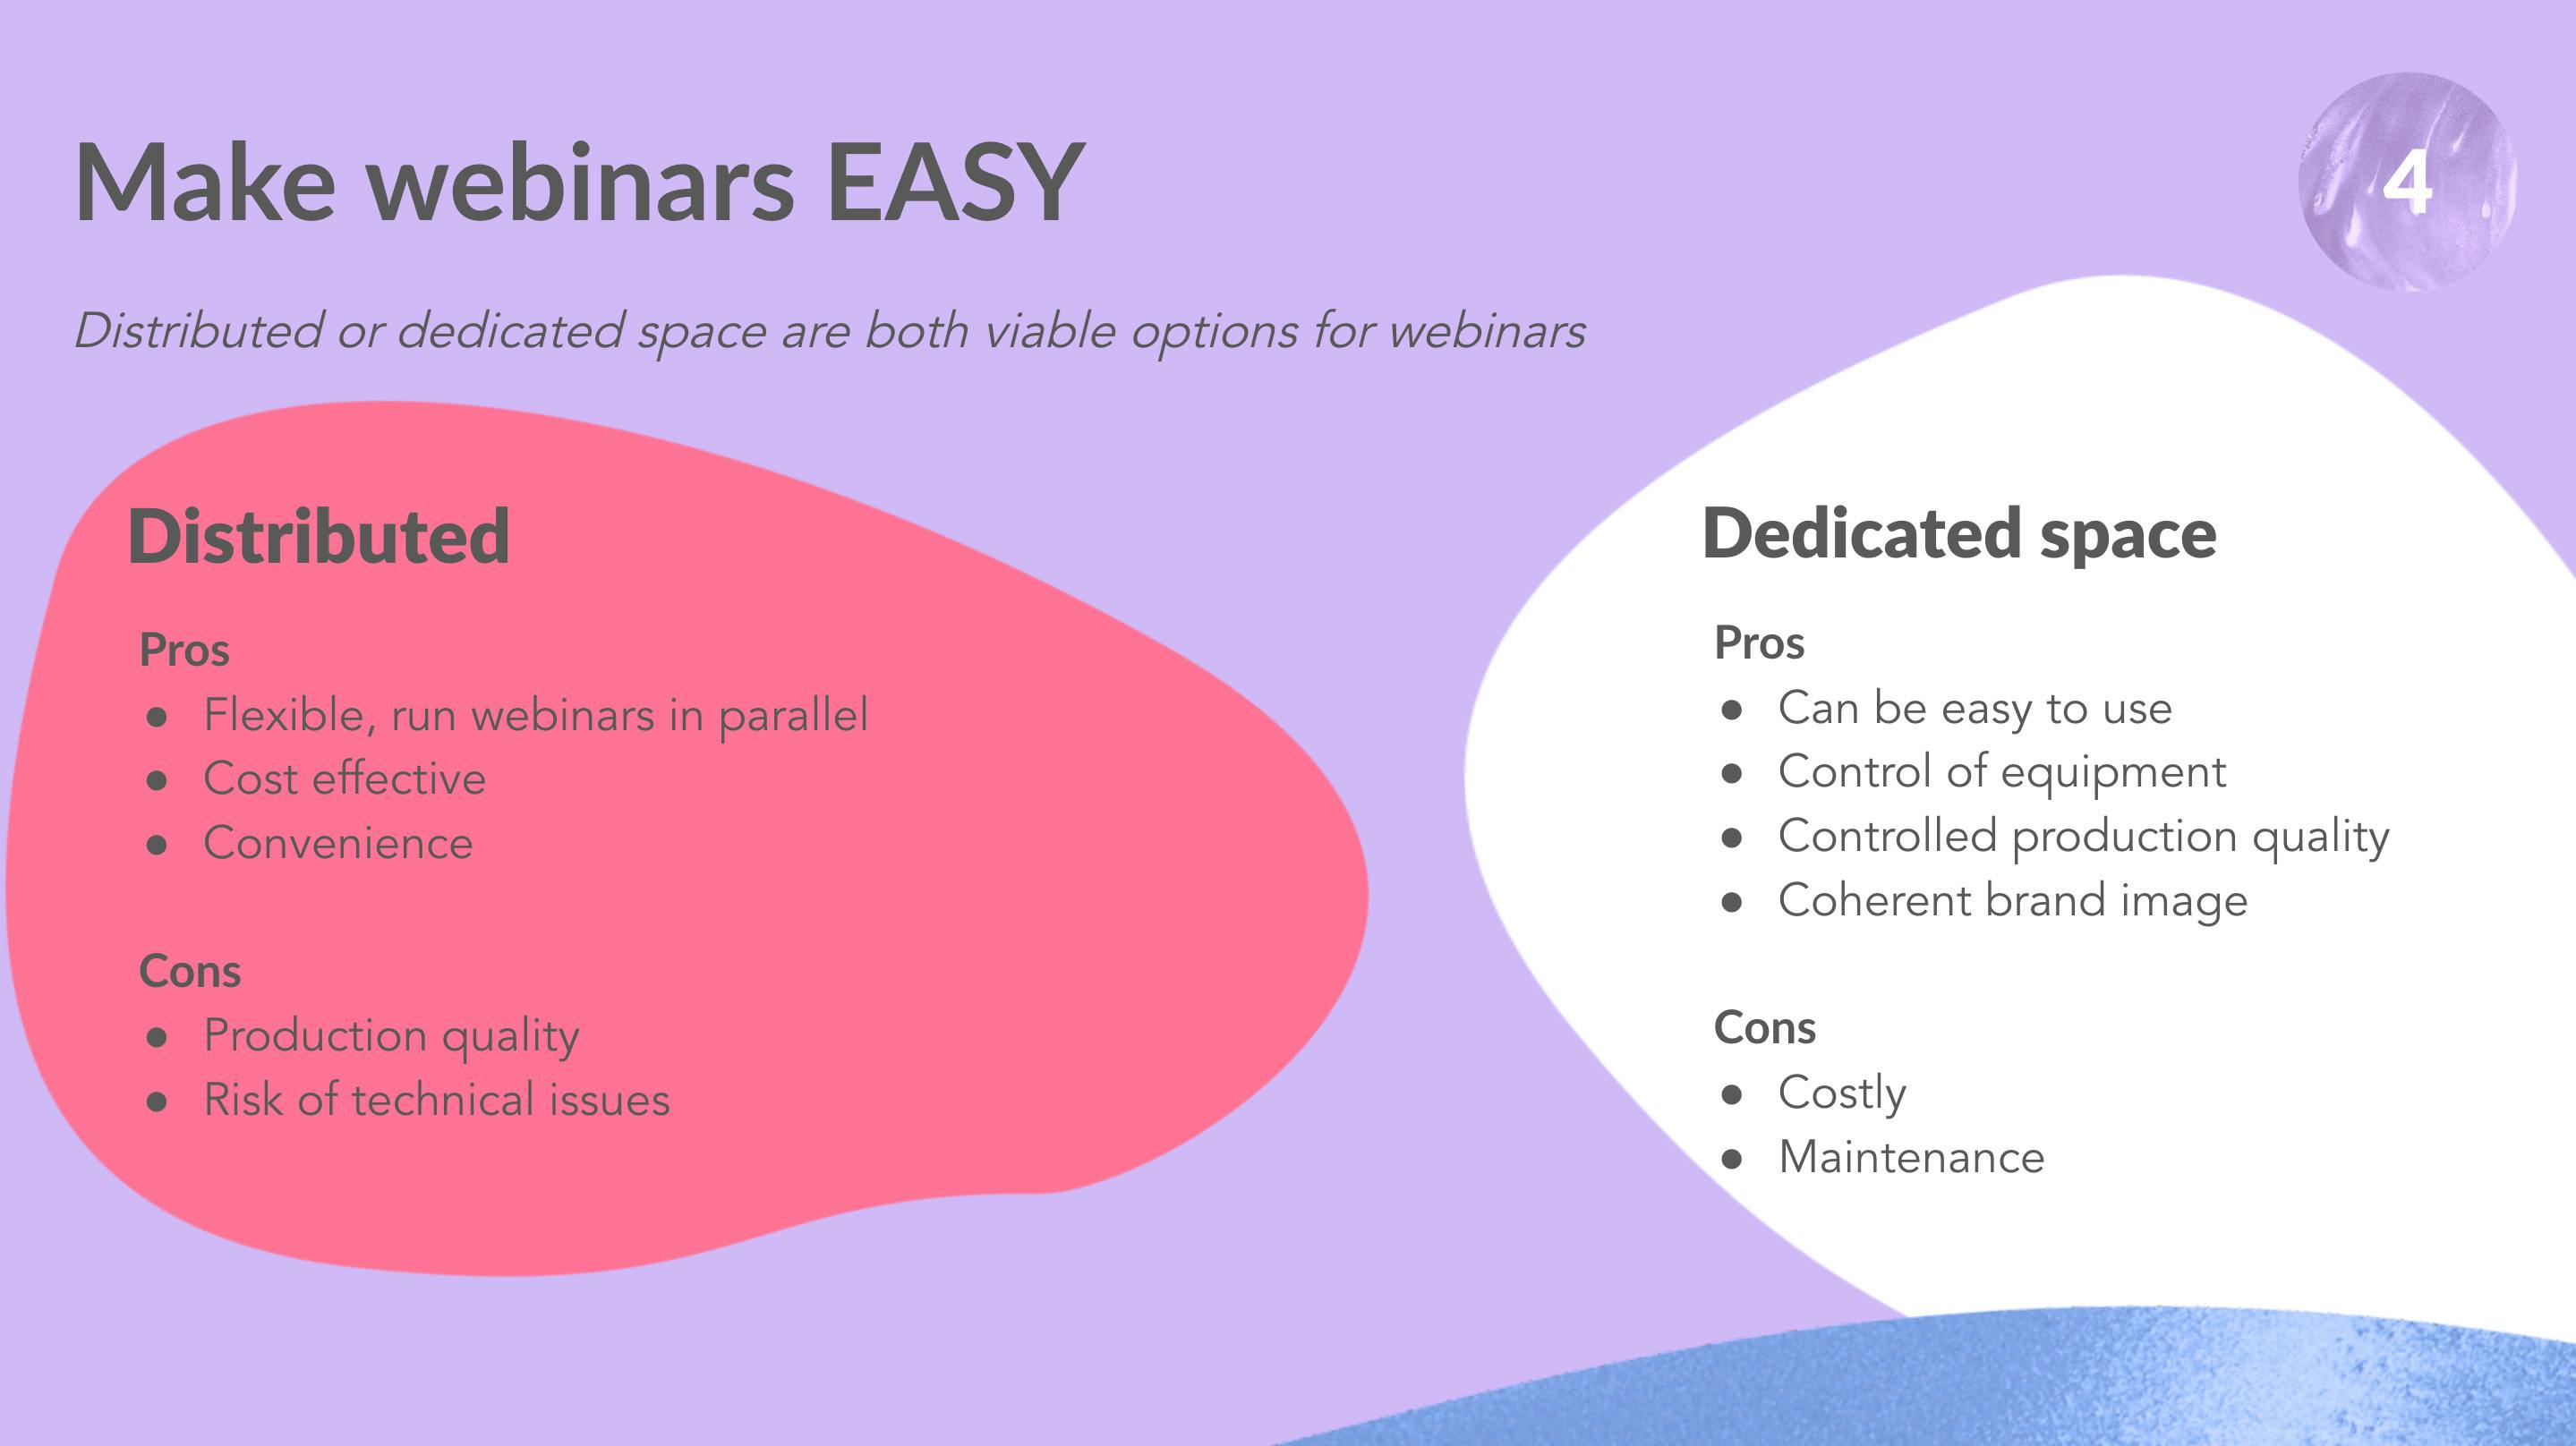 Make webinars easy - get colleagues to join